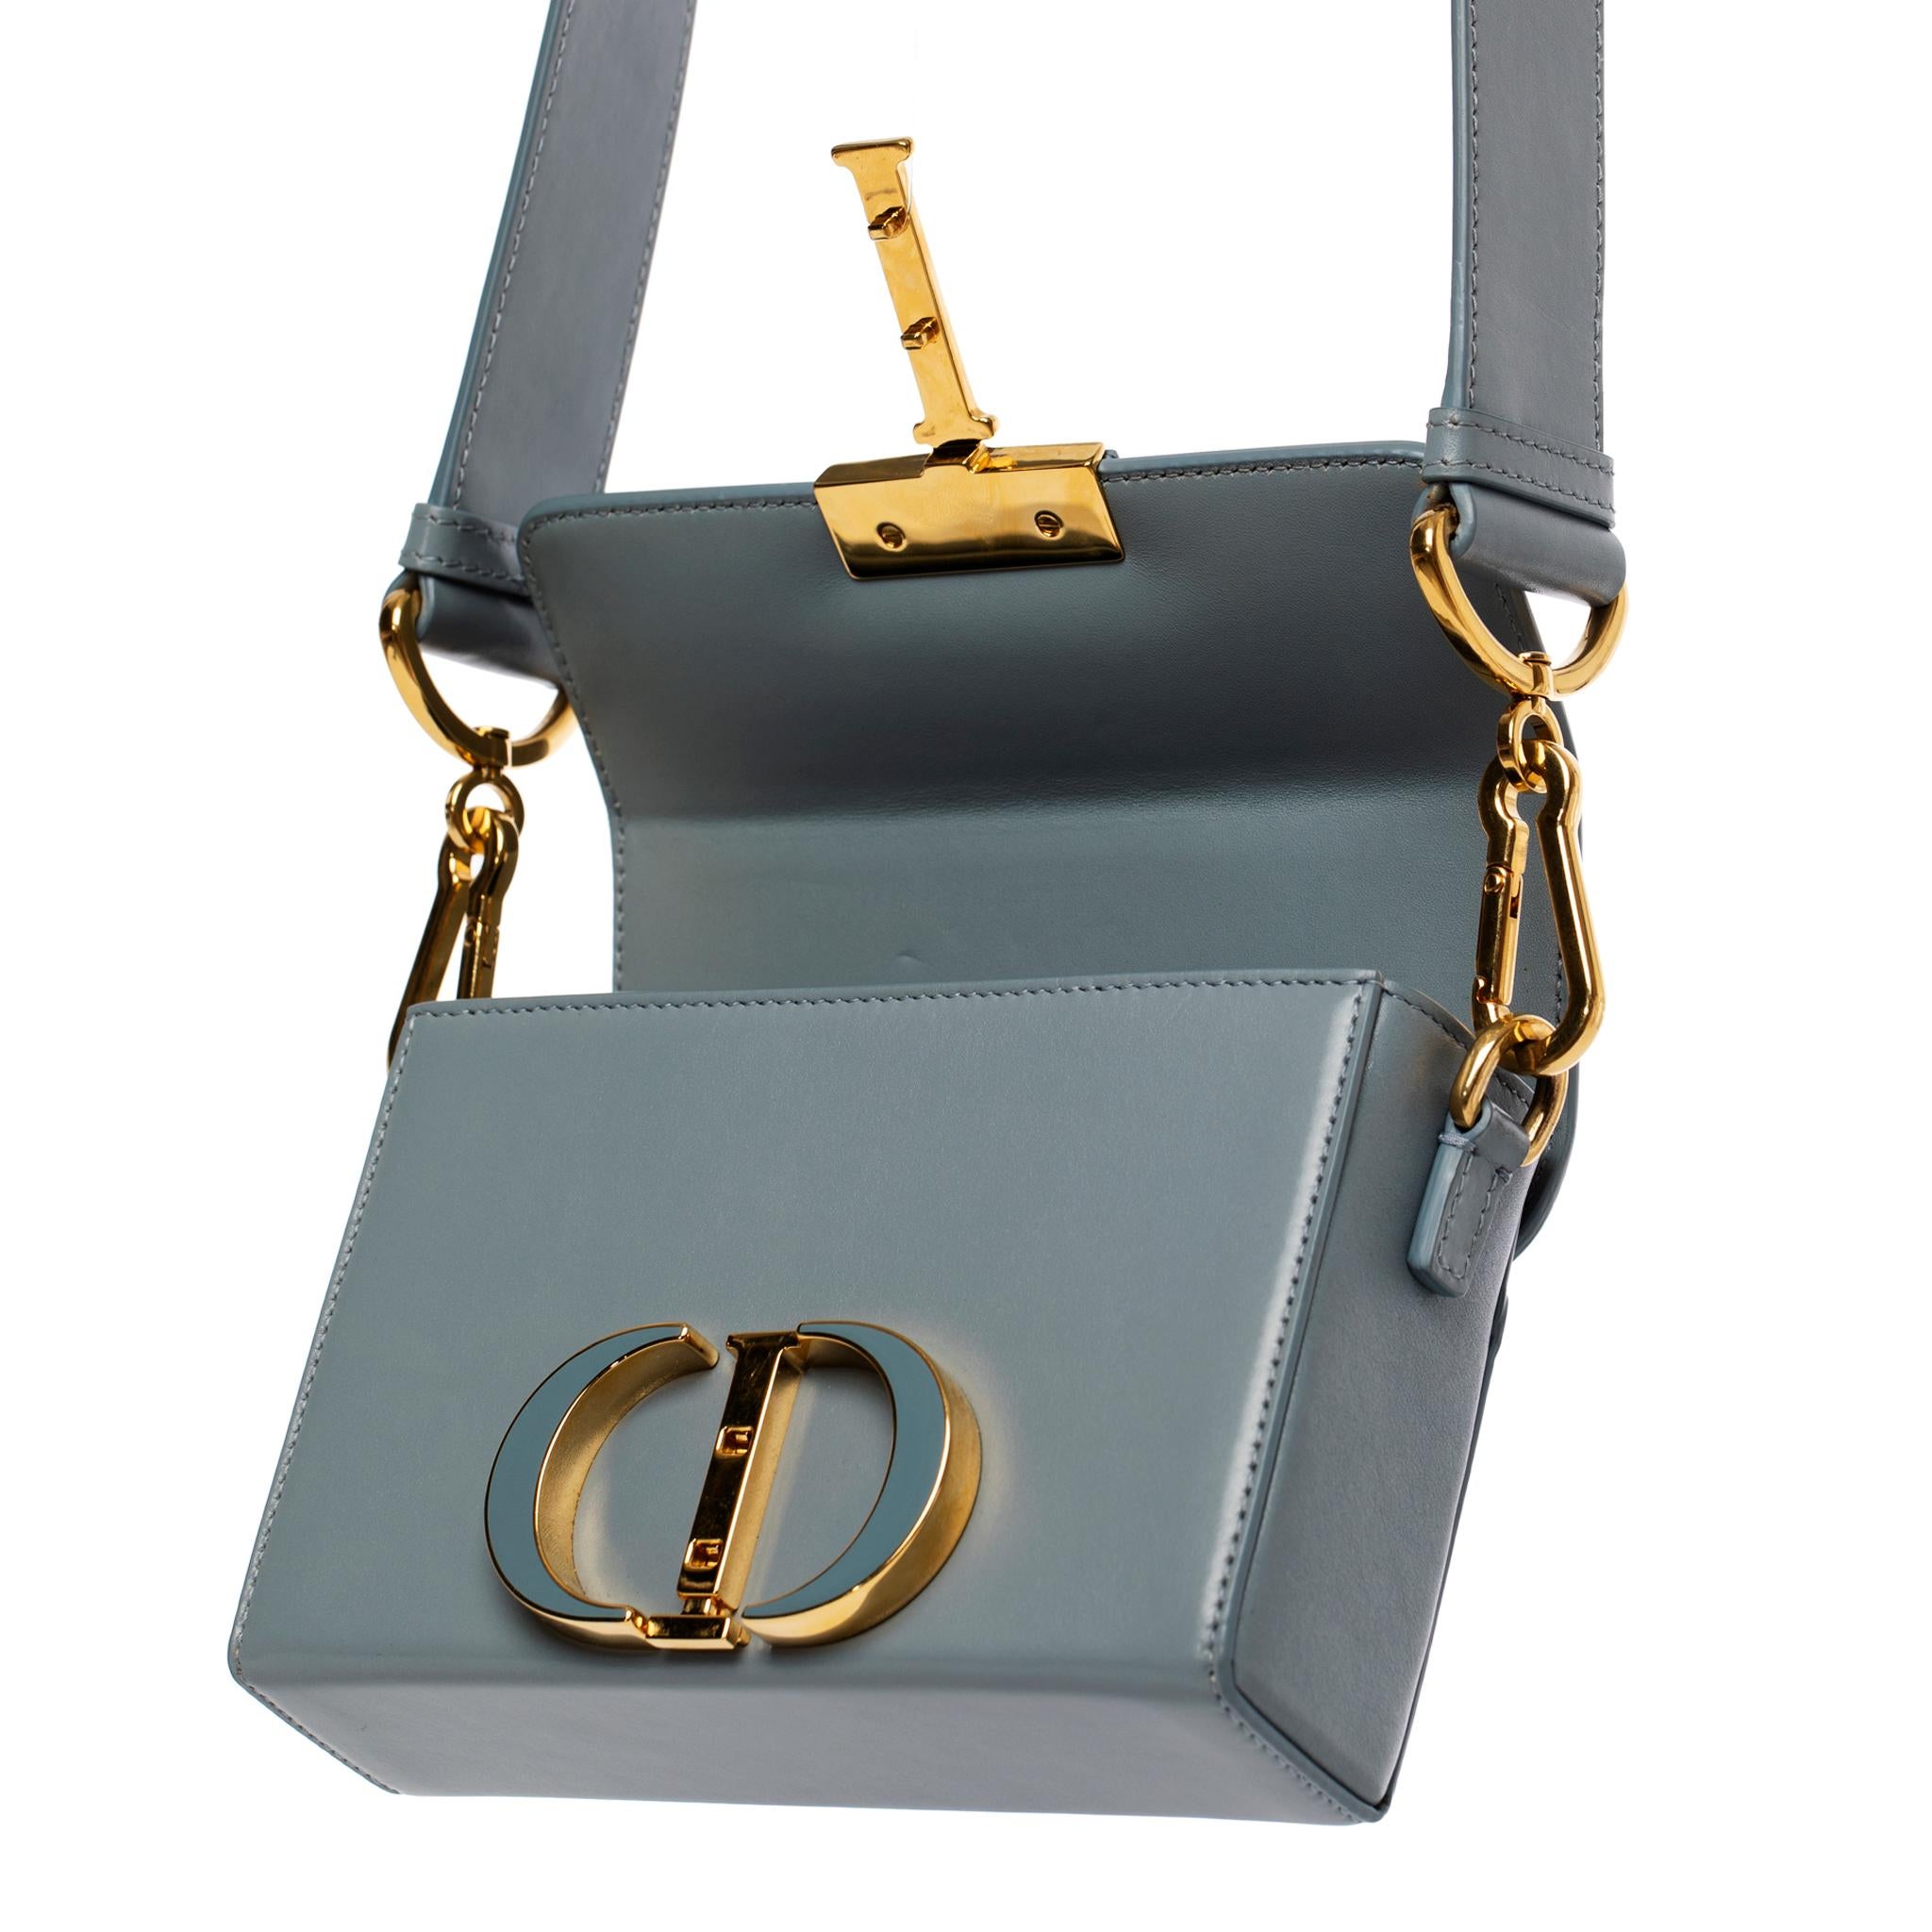 Christian Dior 30 Montaigne Bag Blue-Grey Leather Gold Tone Hardware In Excellent Condition For Sale In DOUBLE BAY, NSW